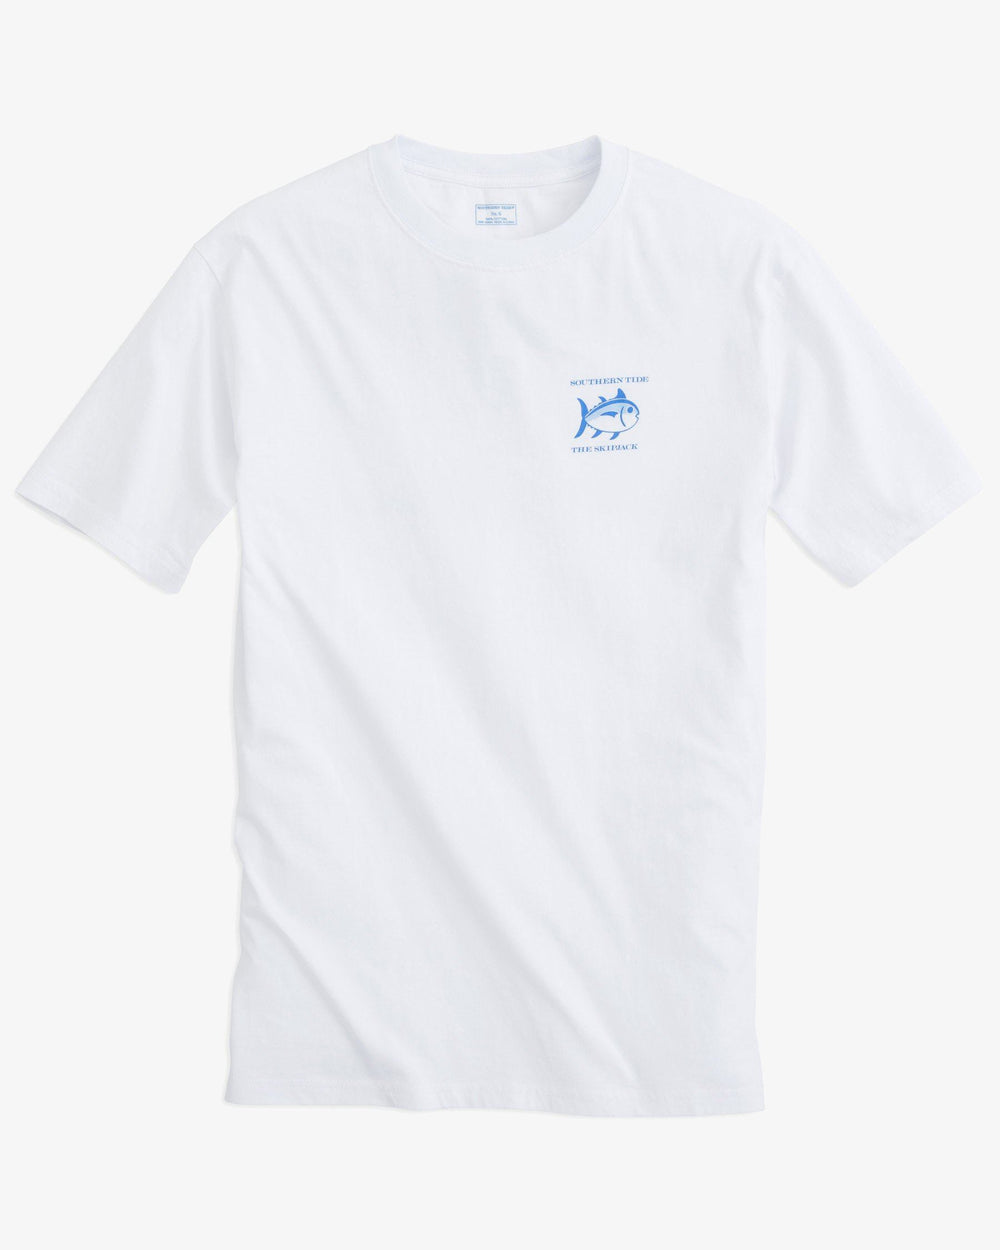 The front view of the Men's White Original Skipjack Short Sleeve T-Shirt by Southern Tide - White